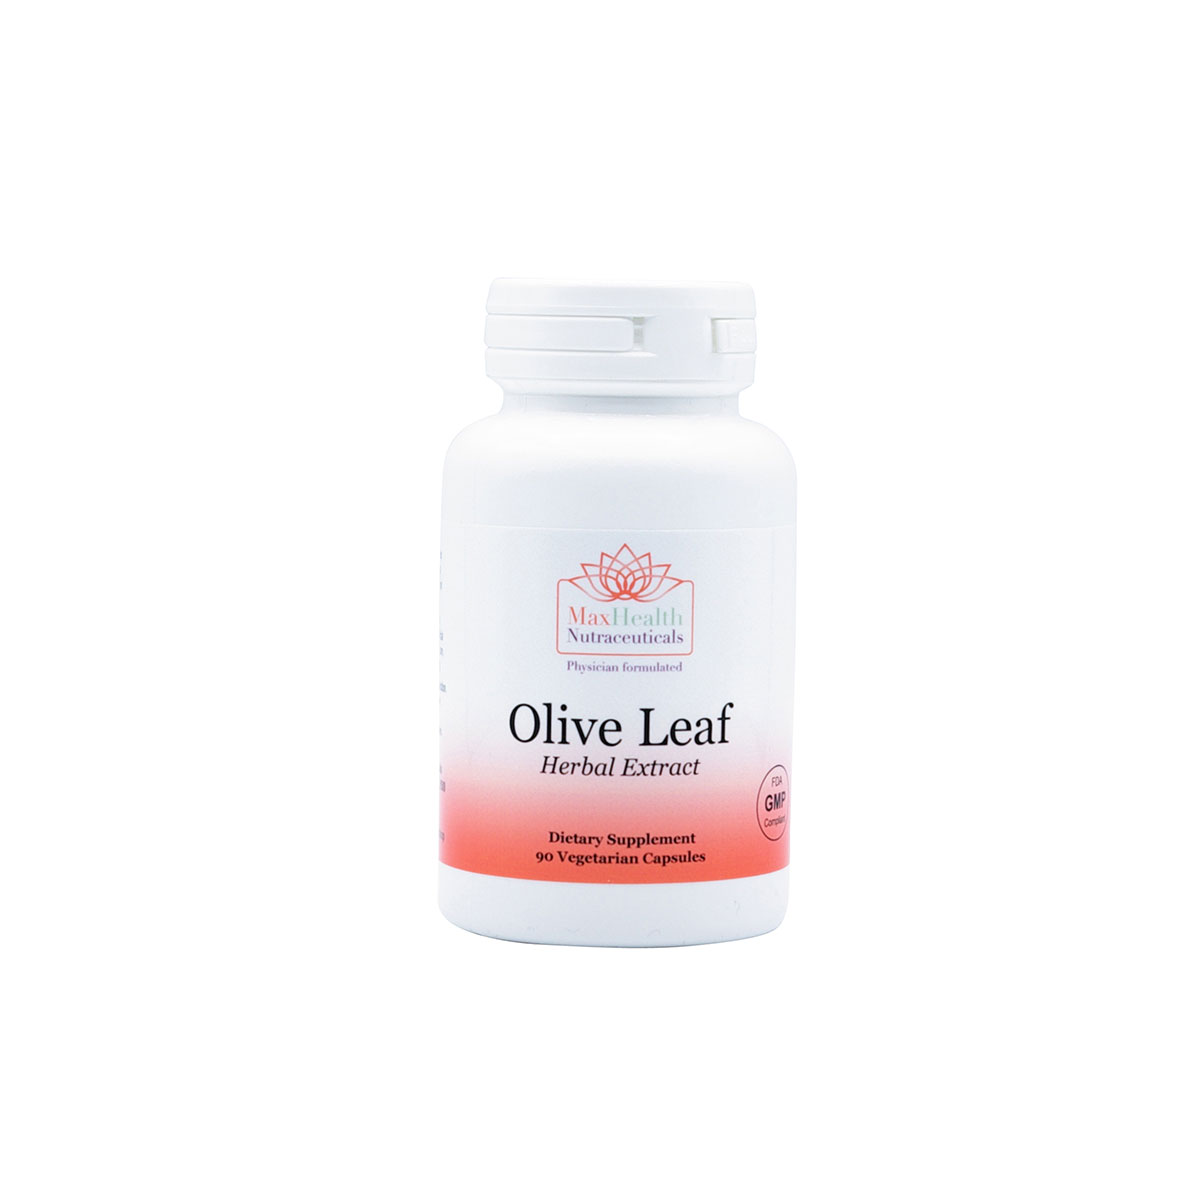 11Olive Leaf Herbal Extract